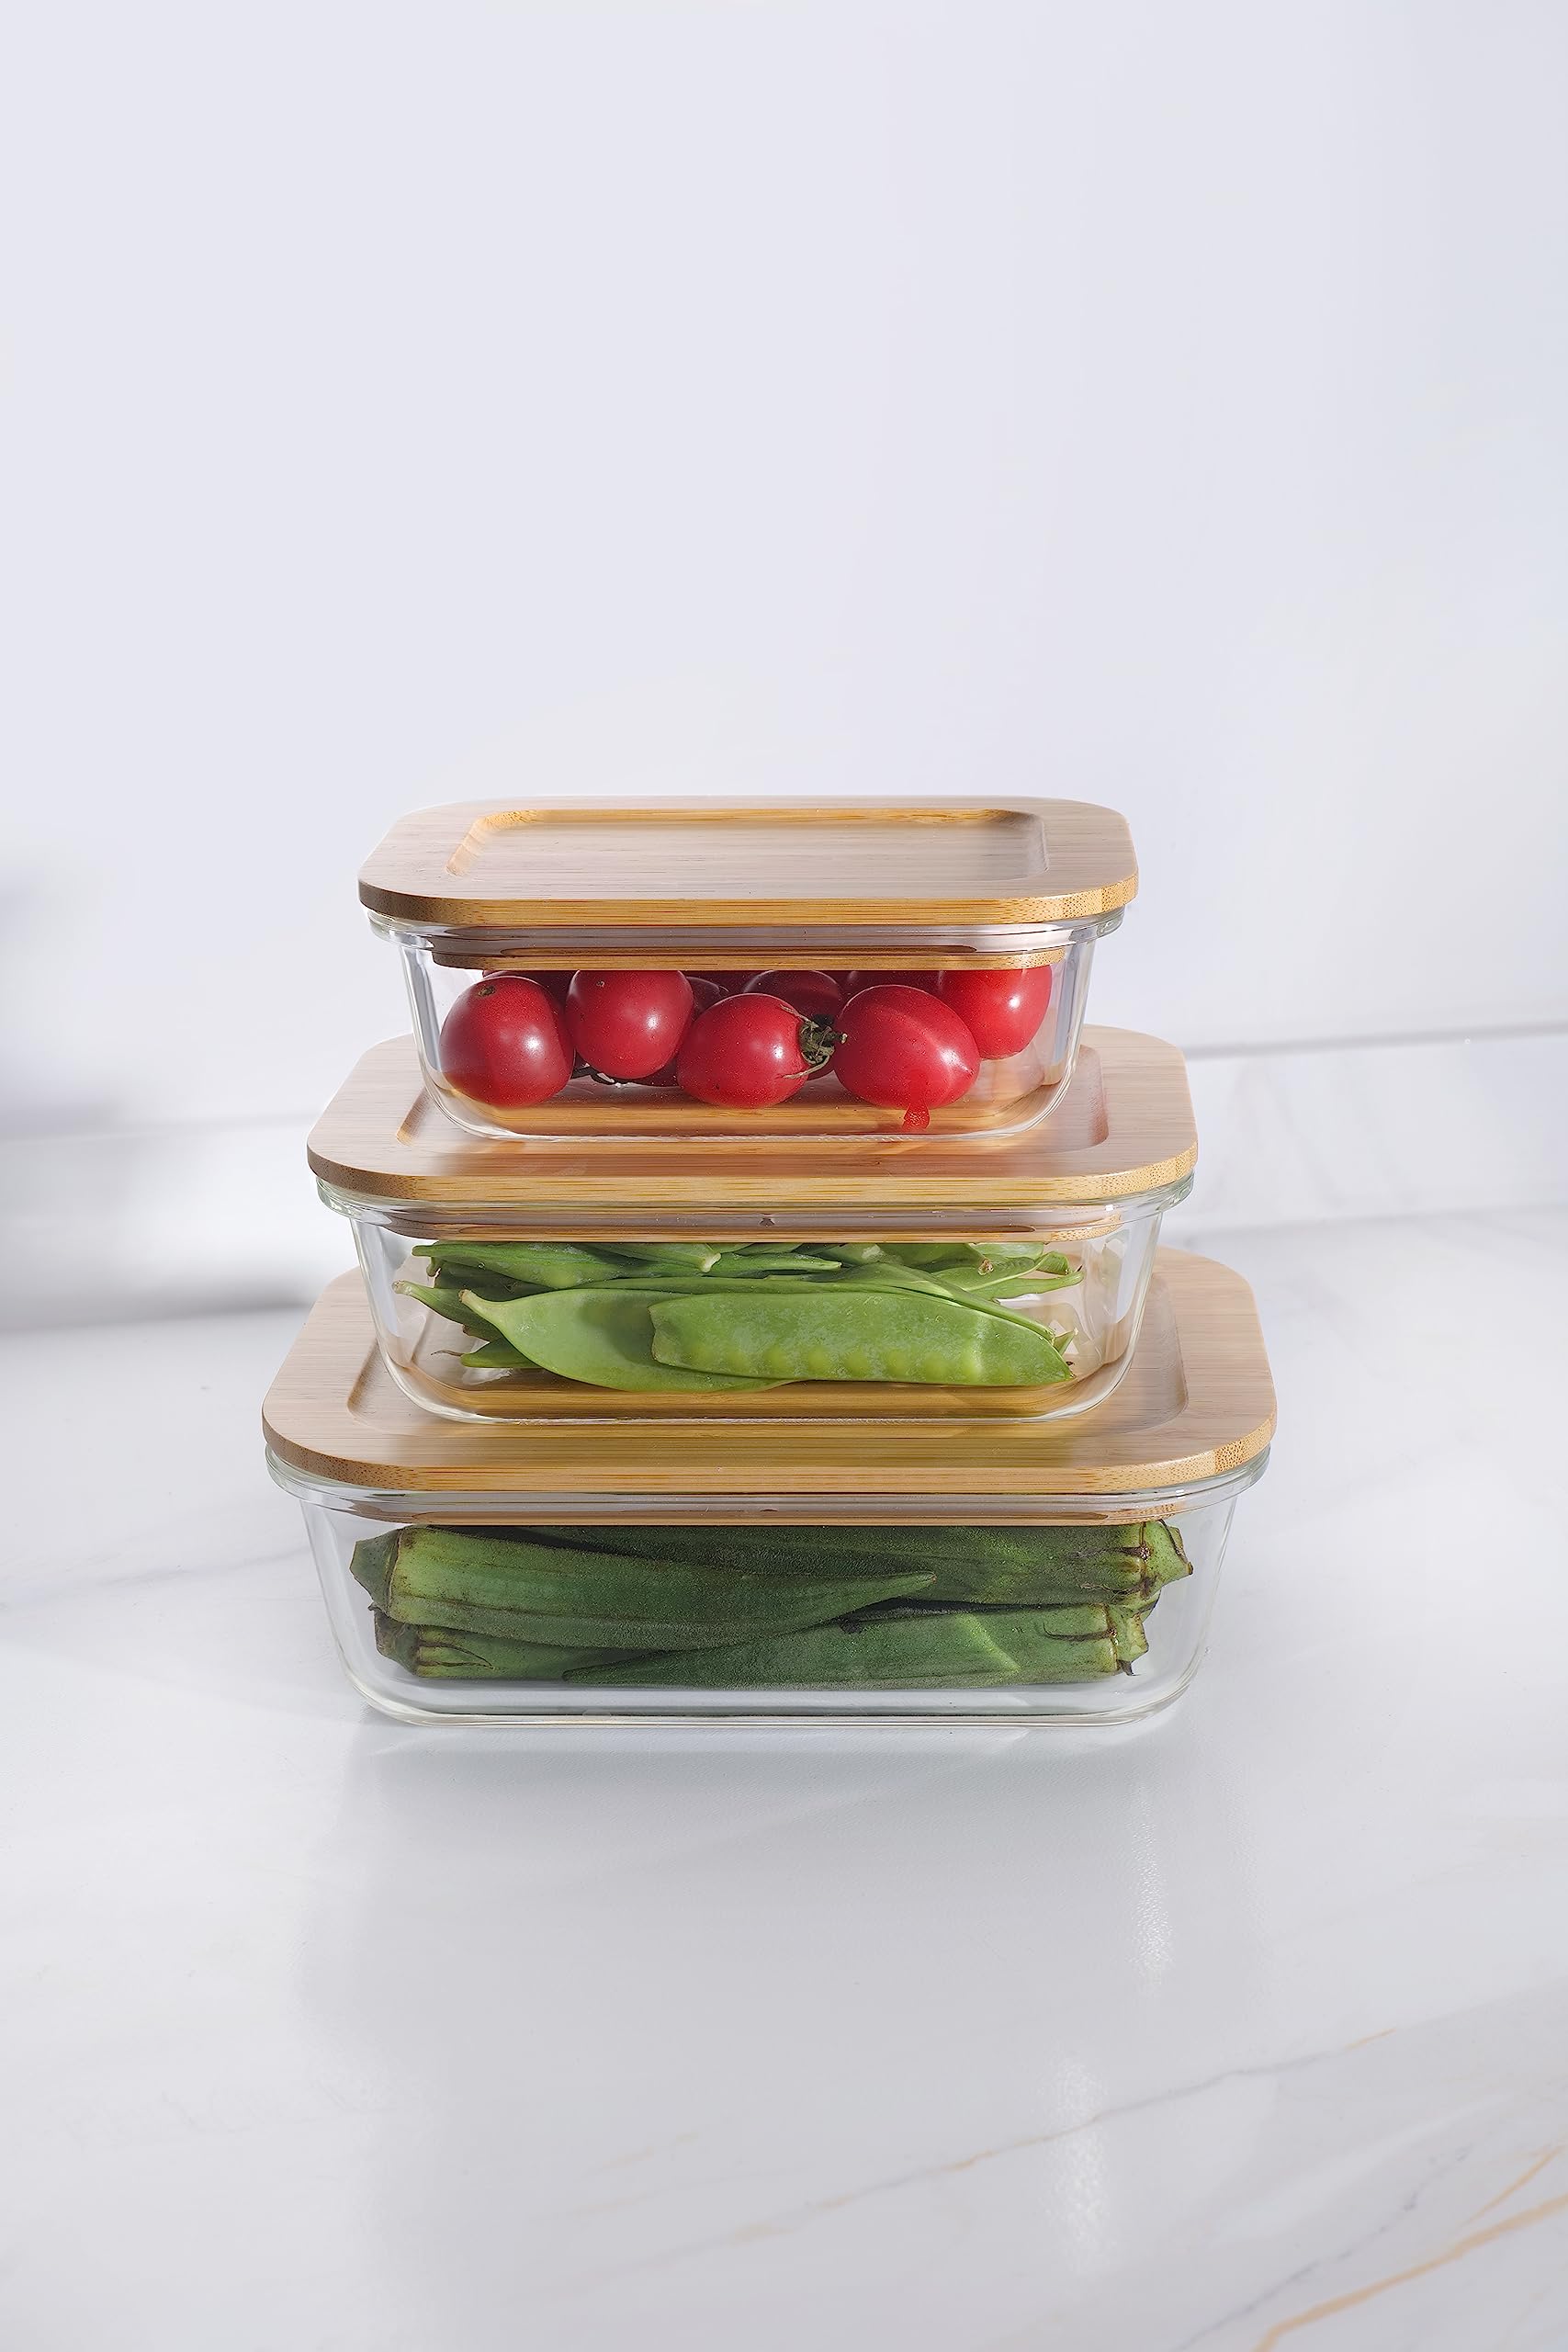 Borosilicate Glass Container with Bamboo Lid - 640ML